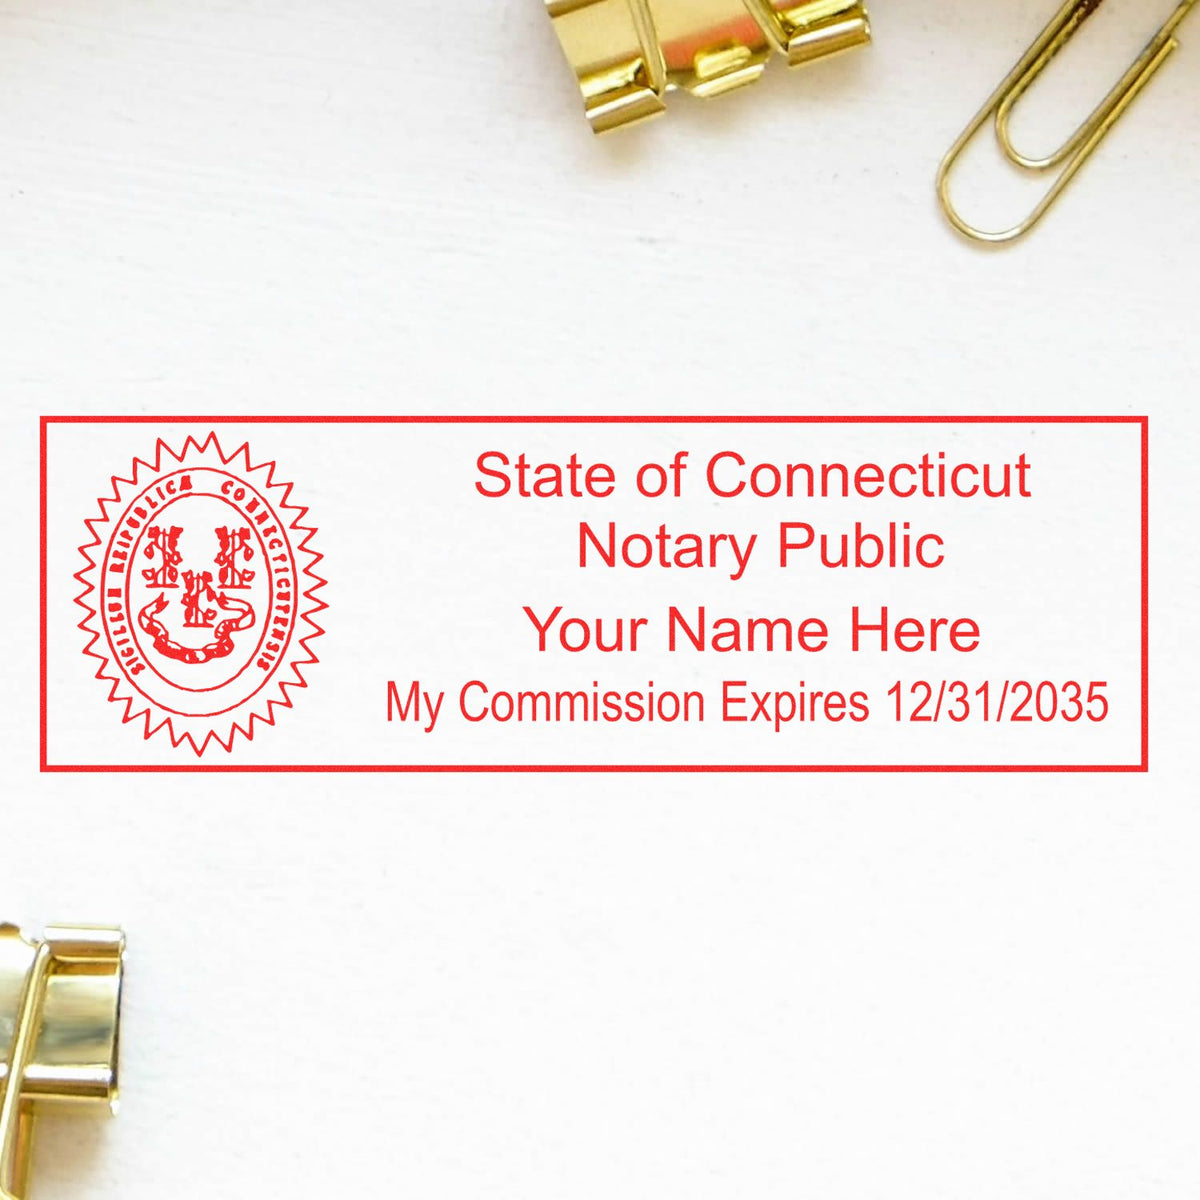 The Heavy-Duty Connecticut Rectangular Notary Stamp stamp impression comes to life with a crisp, detailed photo on paper - showcasing true professional quality.